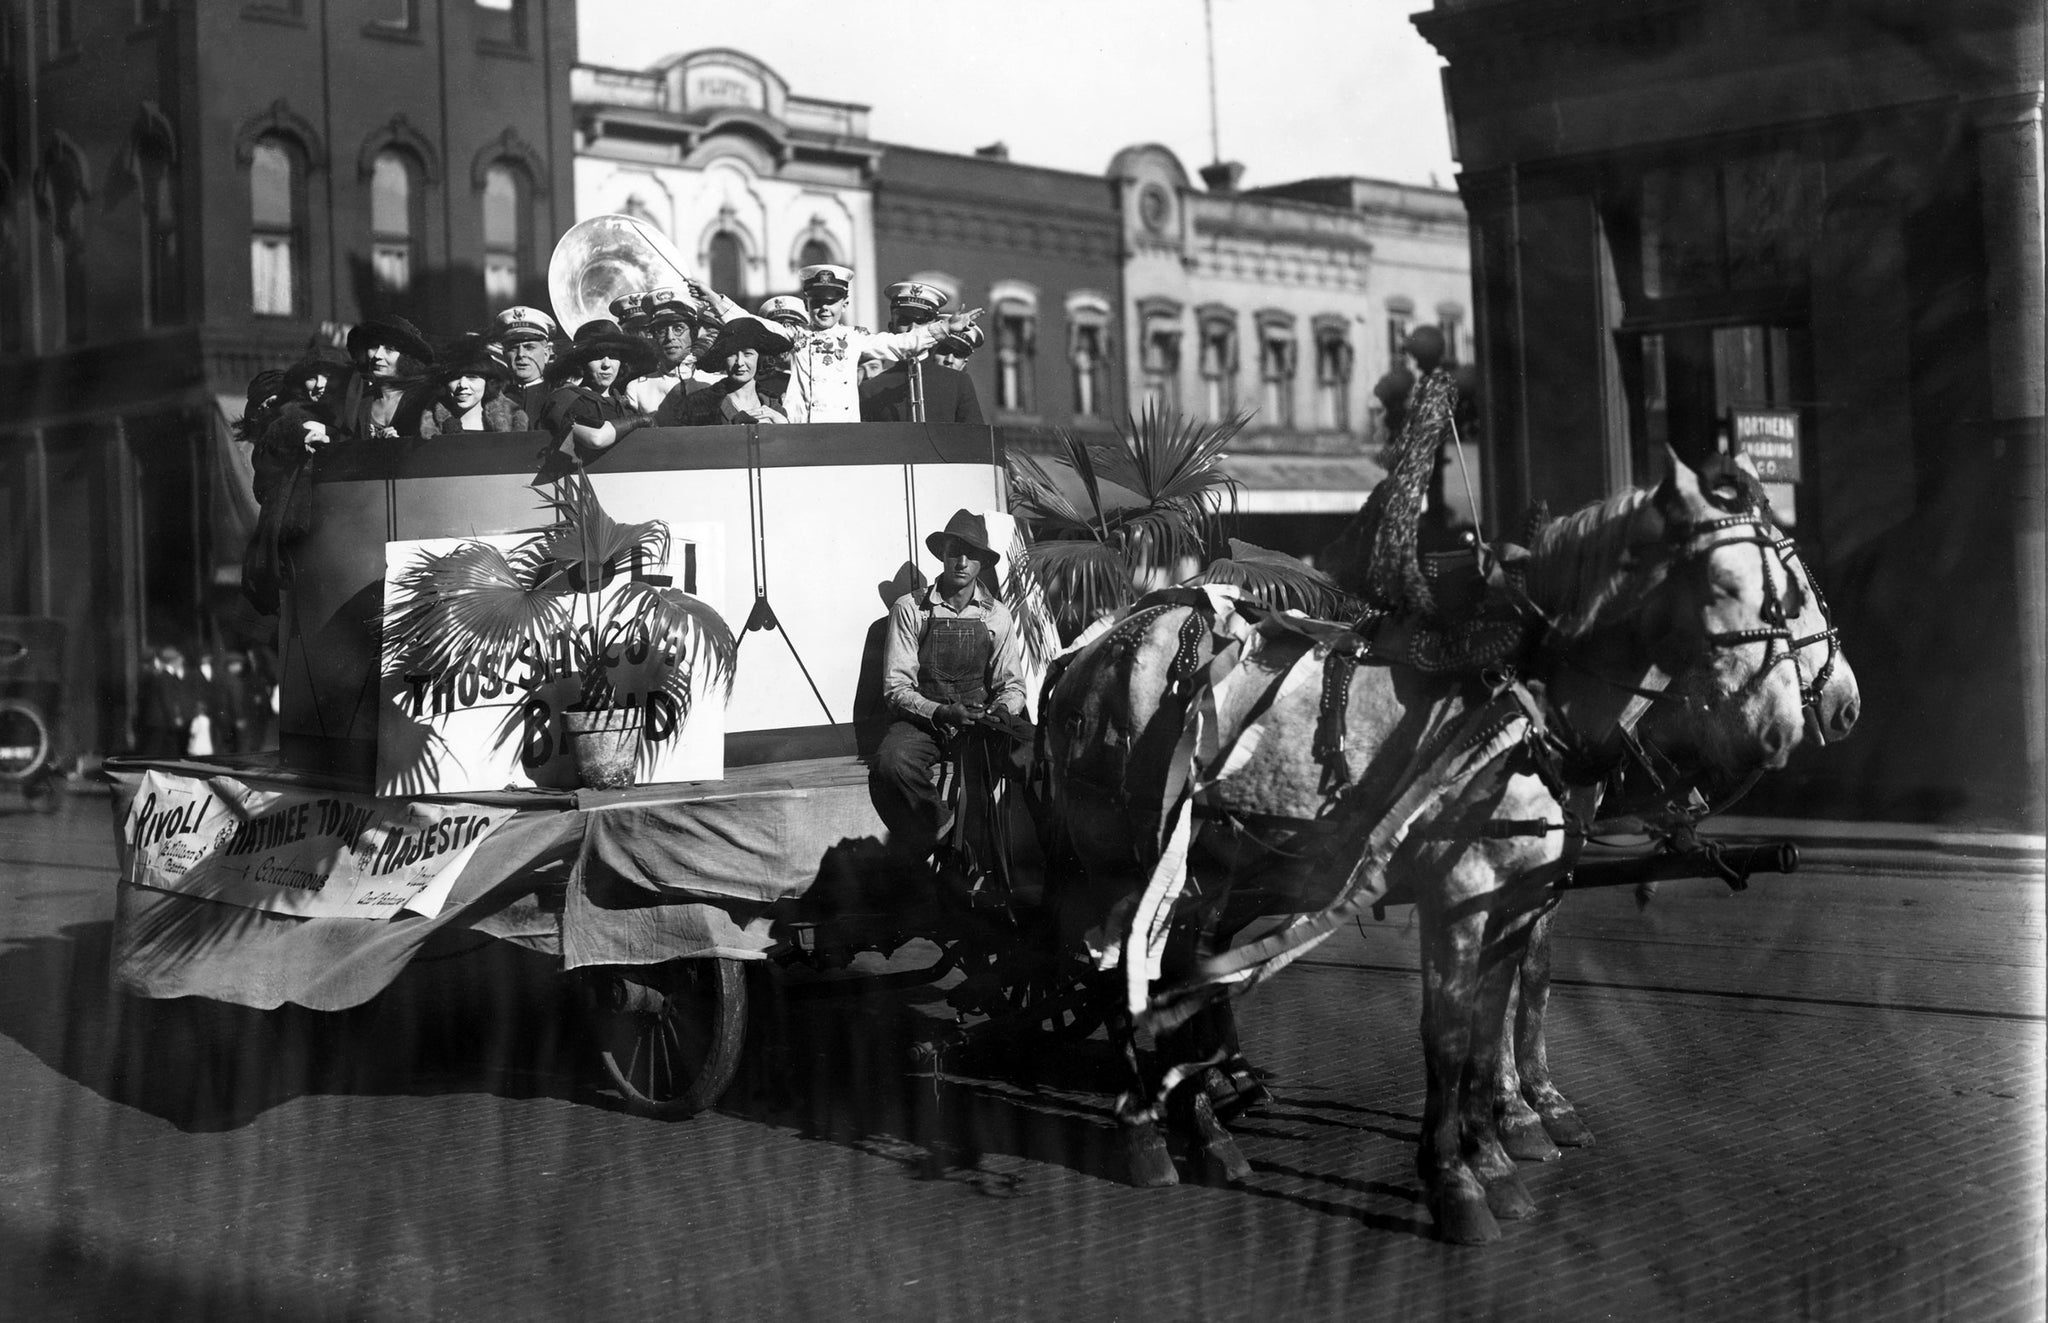 The Thomas Sacco Band from New Orleans on a parade float sponsored by the Rivoli Theatre in October 1922. The band was led by a 7-year-old boy known as “Little Sousa.” -- Courtesy University of Wisconsin-La Crosse / #3105